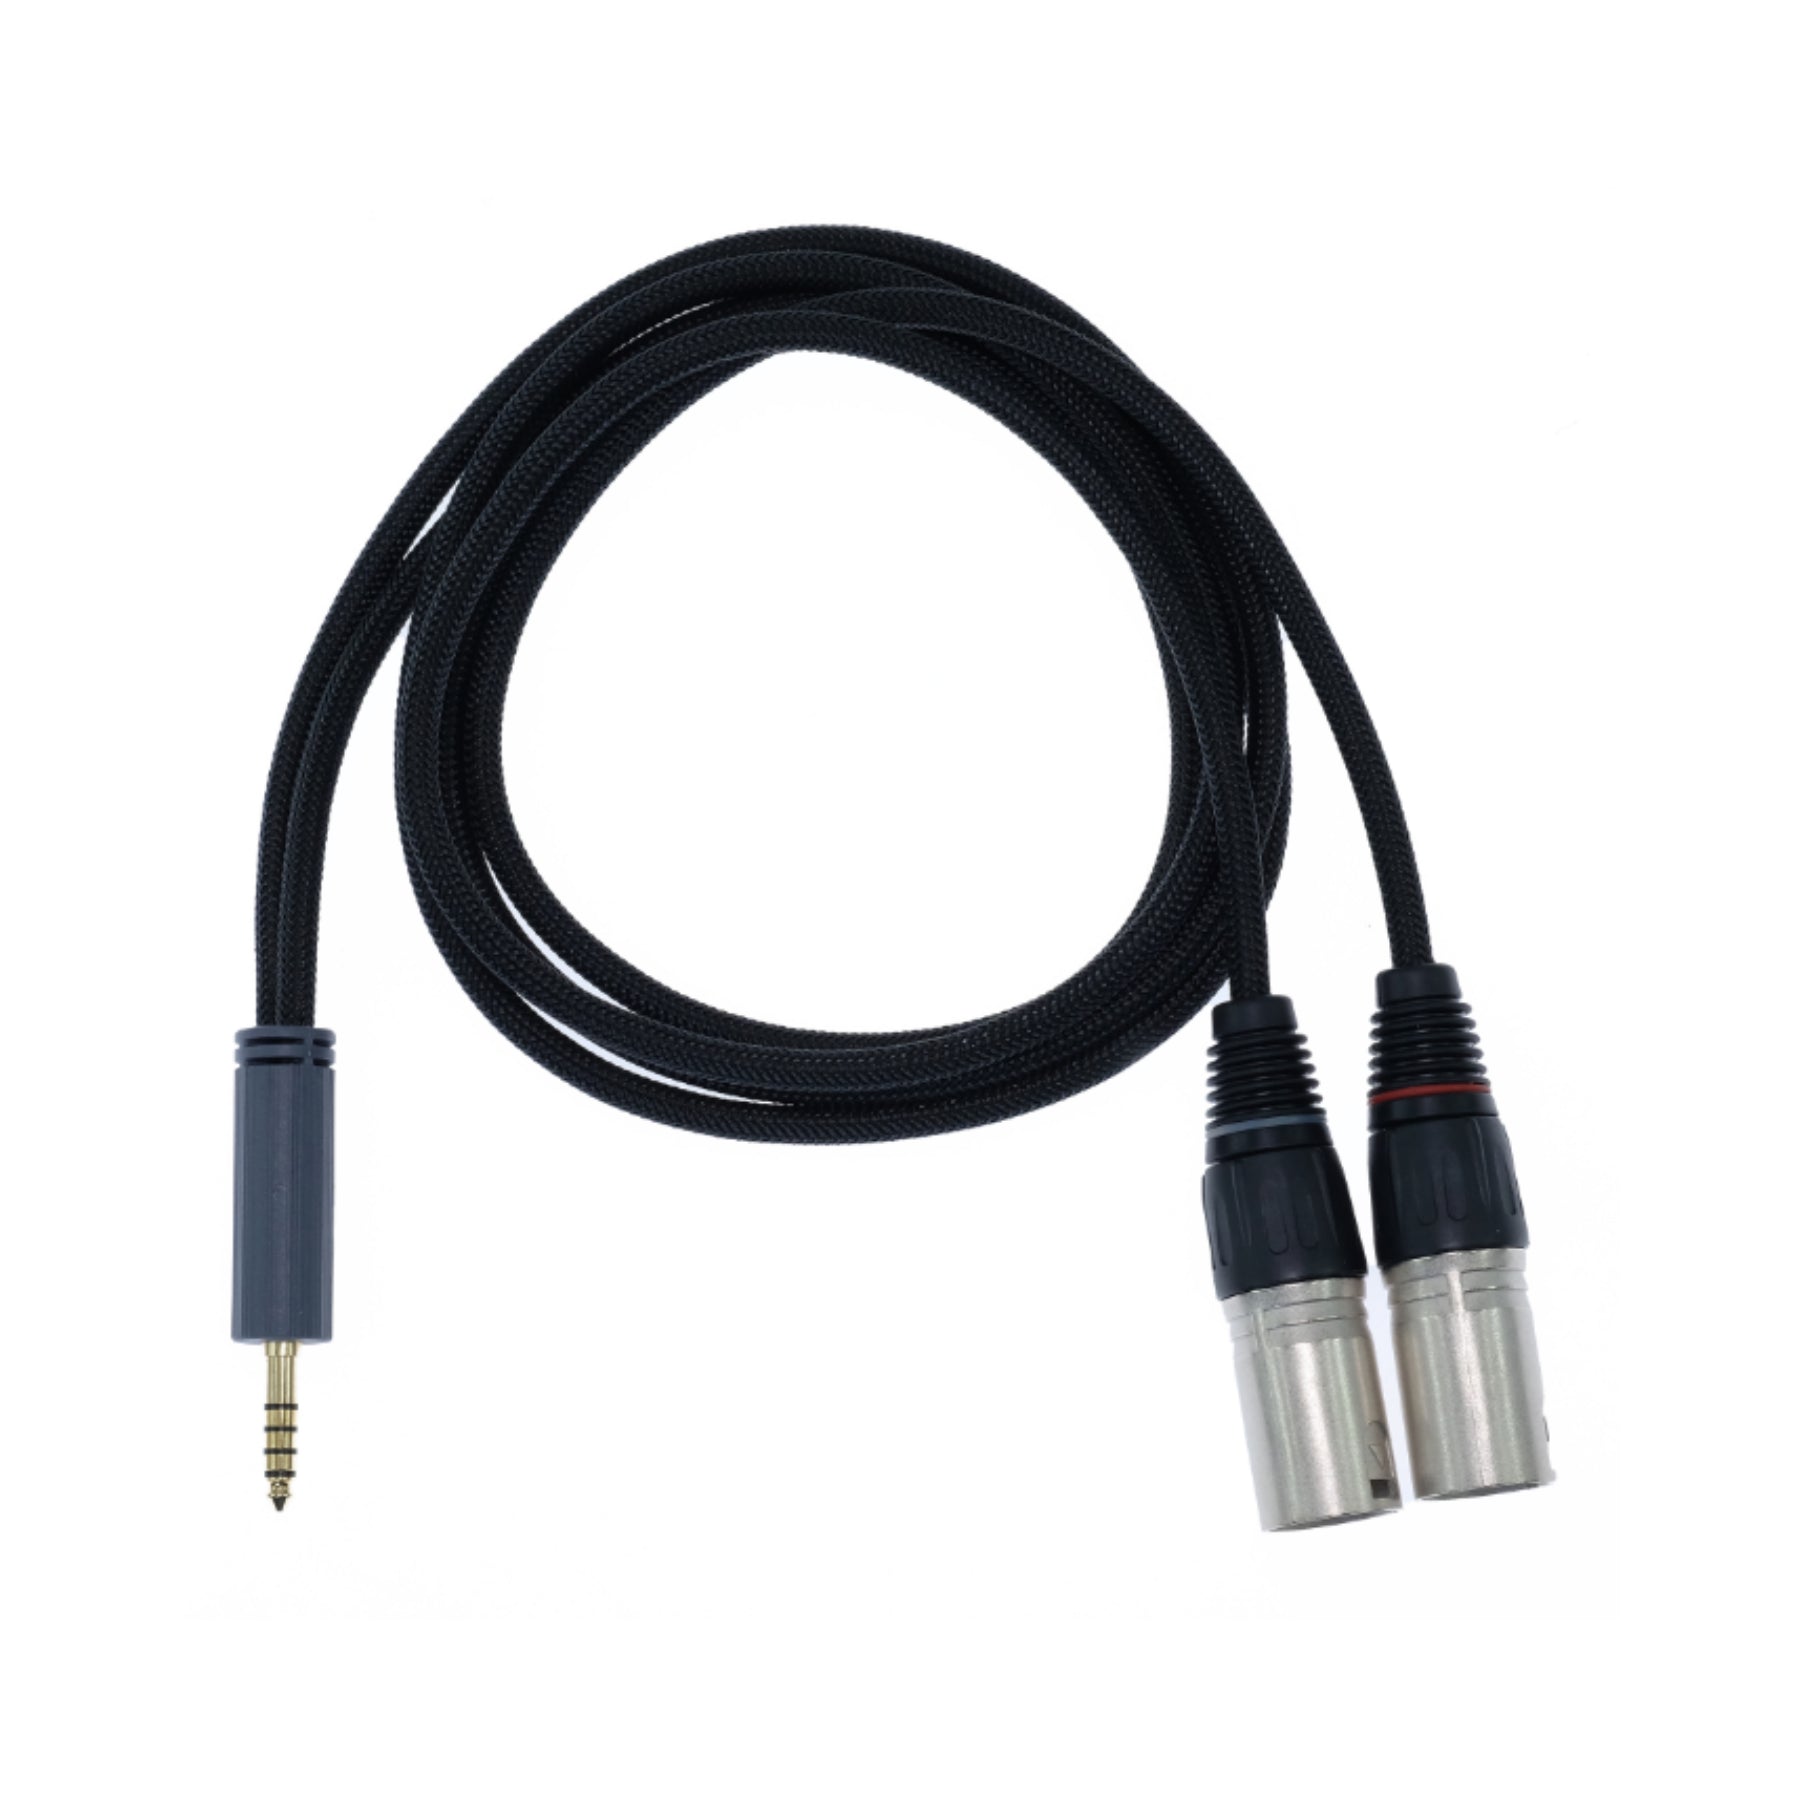 iFi 4.4 to XLR Cable Single Ended | ListenUp